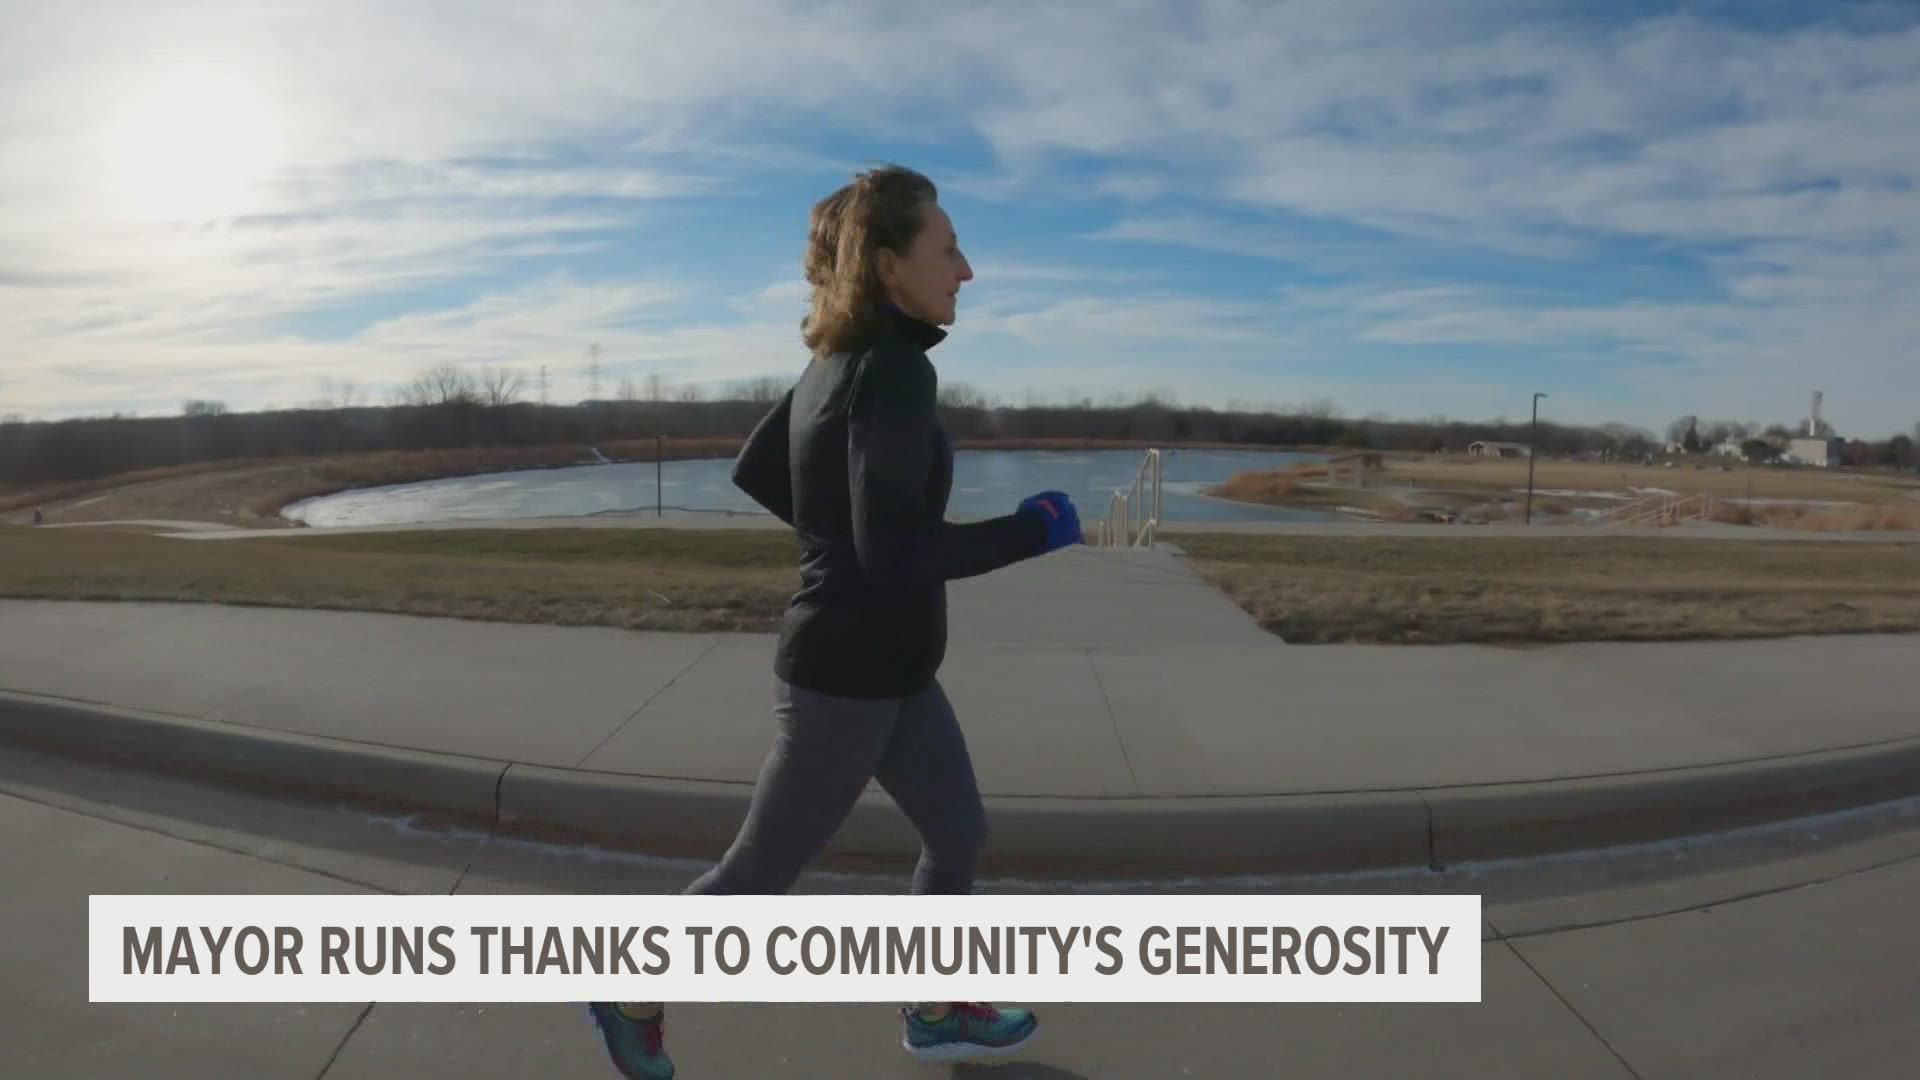 Mayor Paula Dierenfeld challenged her community to donate food or money to a local pantry— and to challenge herself, she's running one mile for every donation.